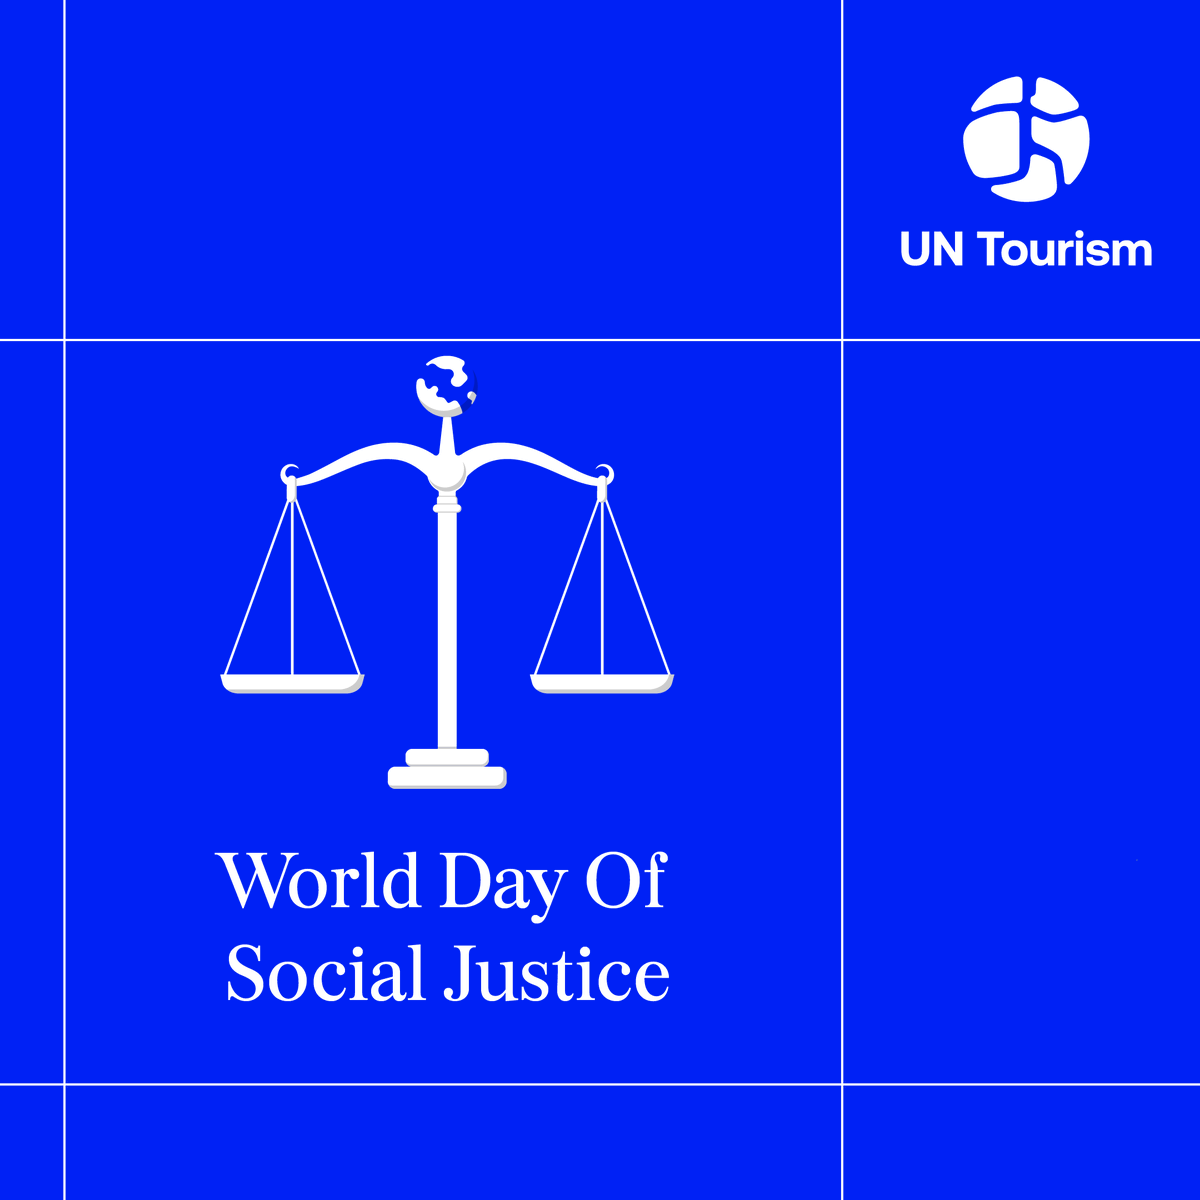 On #WorldDayofSocialJustice, UN Tourism reaffirms its commitment to promoting equality, inclusion, and social justice within the tourism sector. Let's work together to ensure that tourism contributes to building a fairer and more equitable world for all. ✊